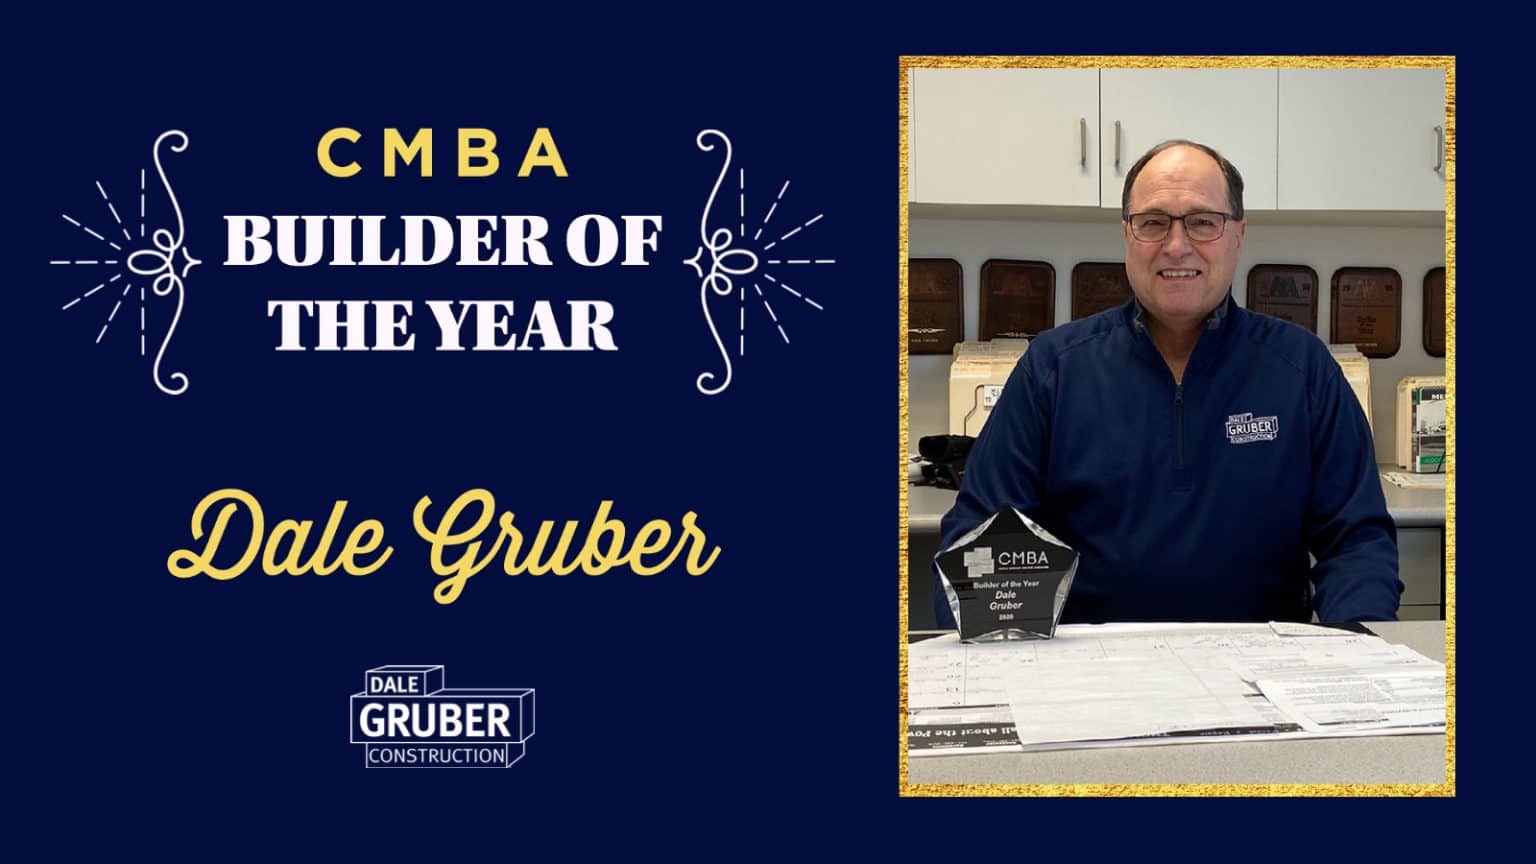 CMBA Builder of the year, Dale Gruber